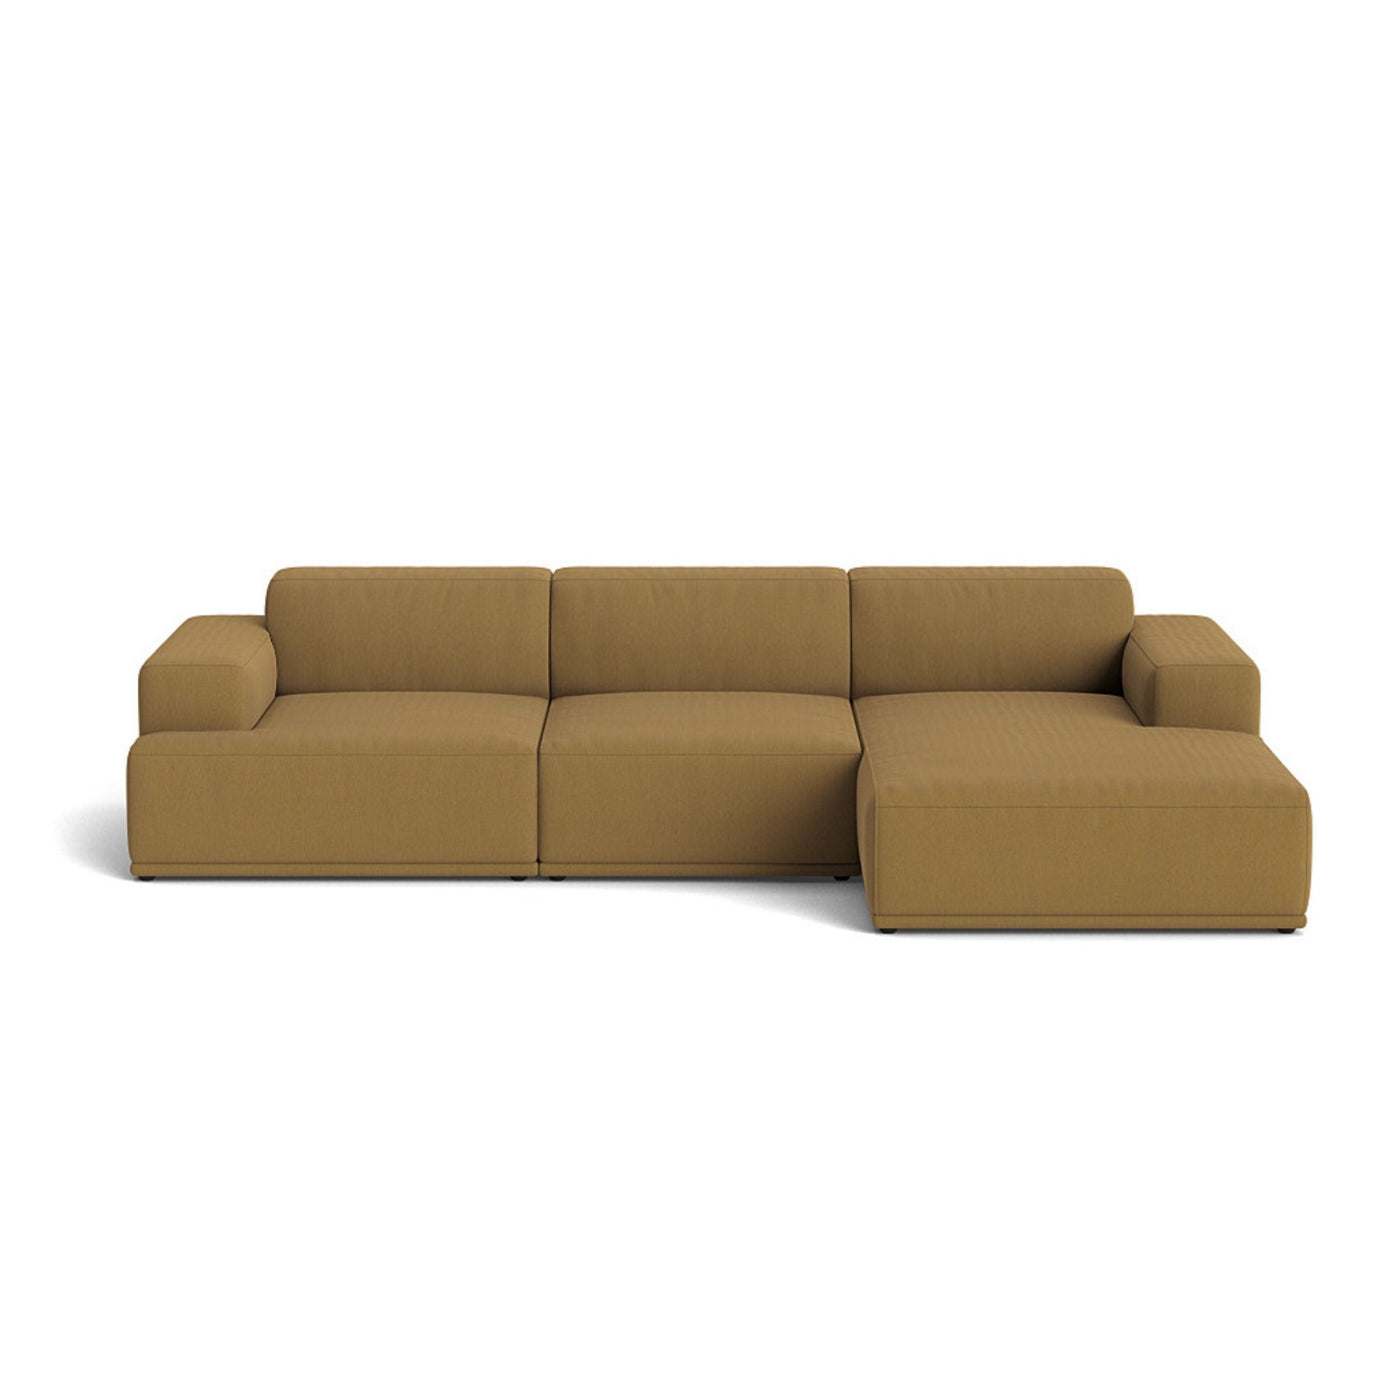 Muuto Connect Soft Modular 3 Seater Sofa, configuration 3. Made-to-order from someday designs. #colour_re-wool-448